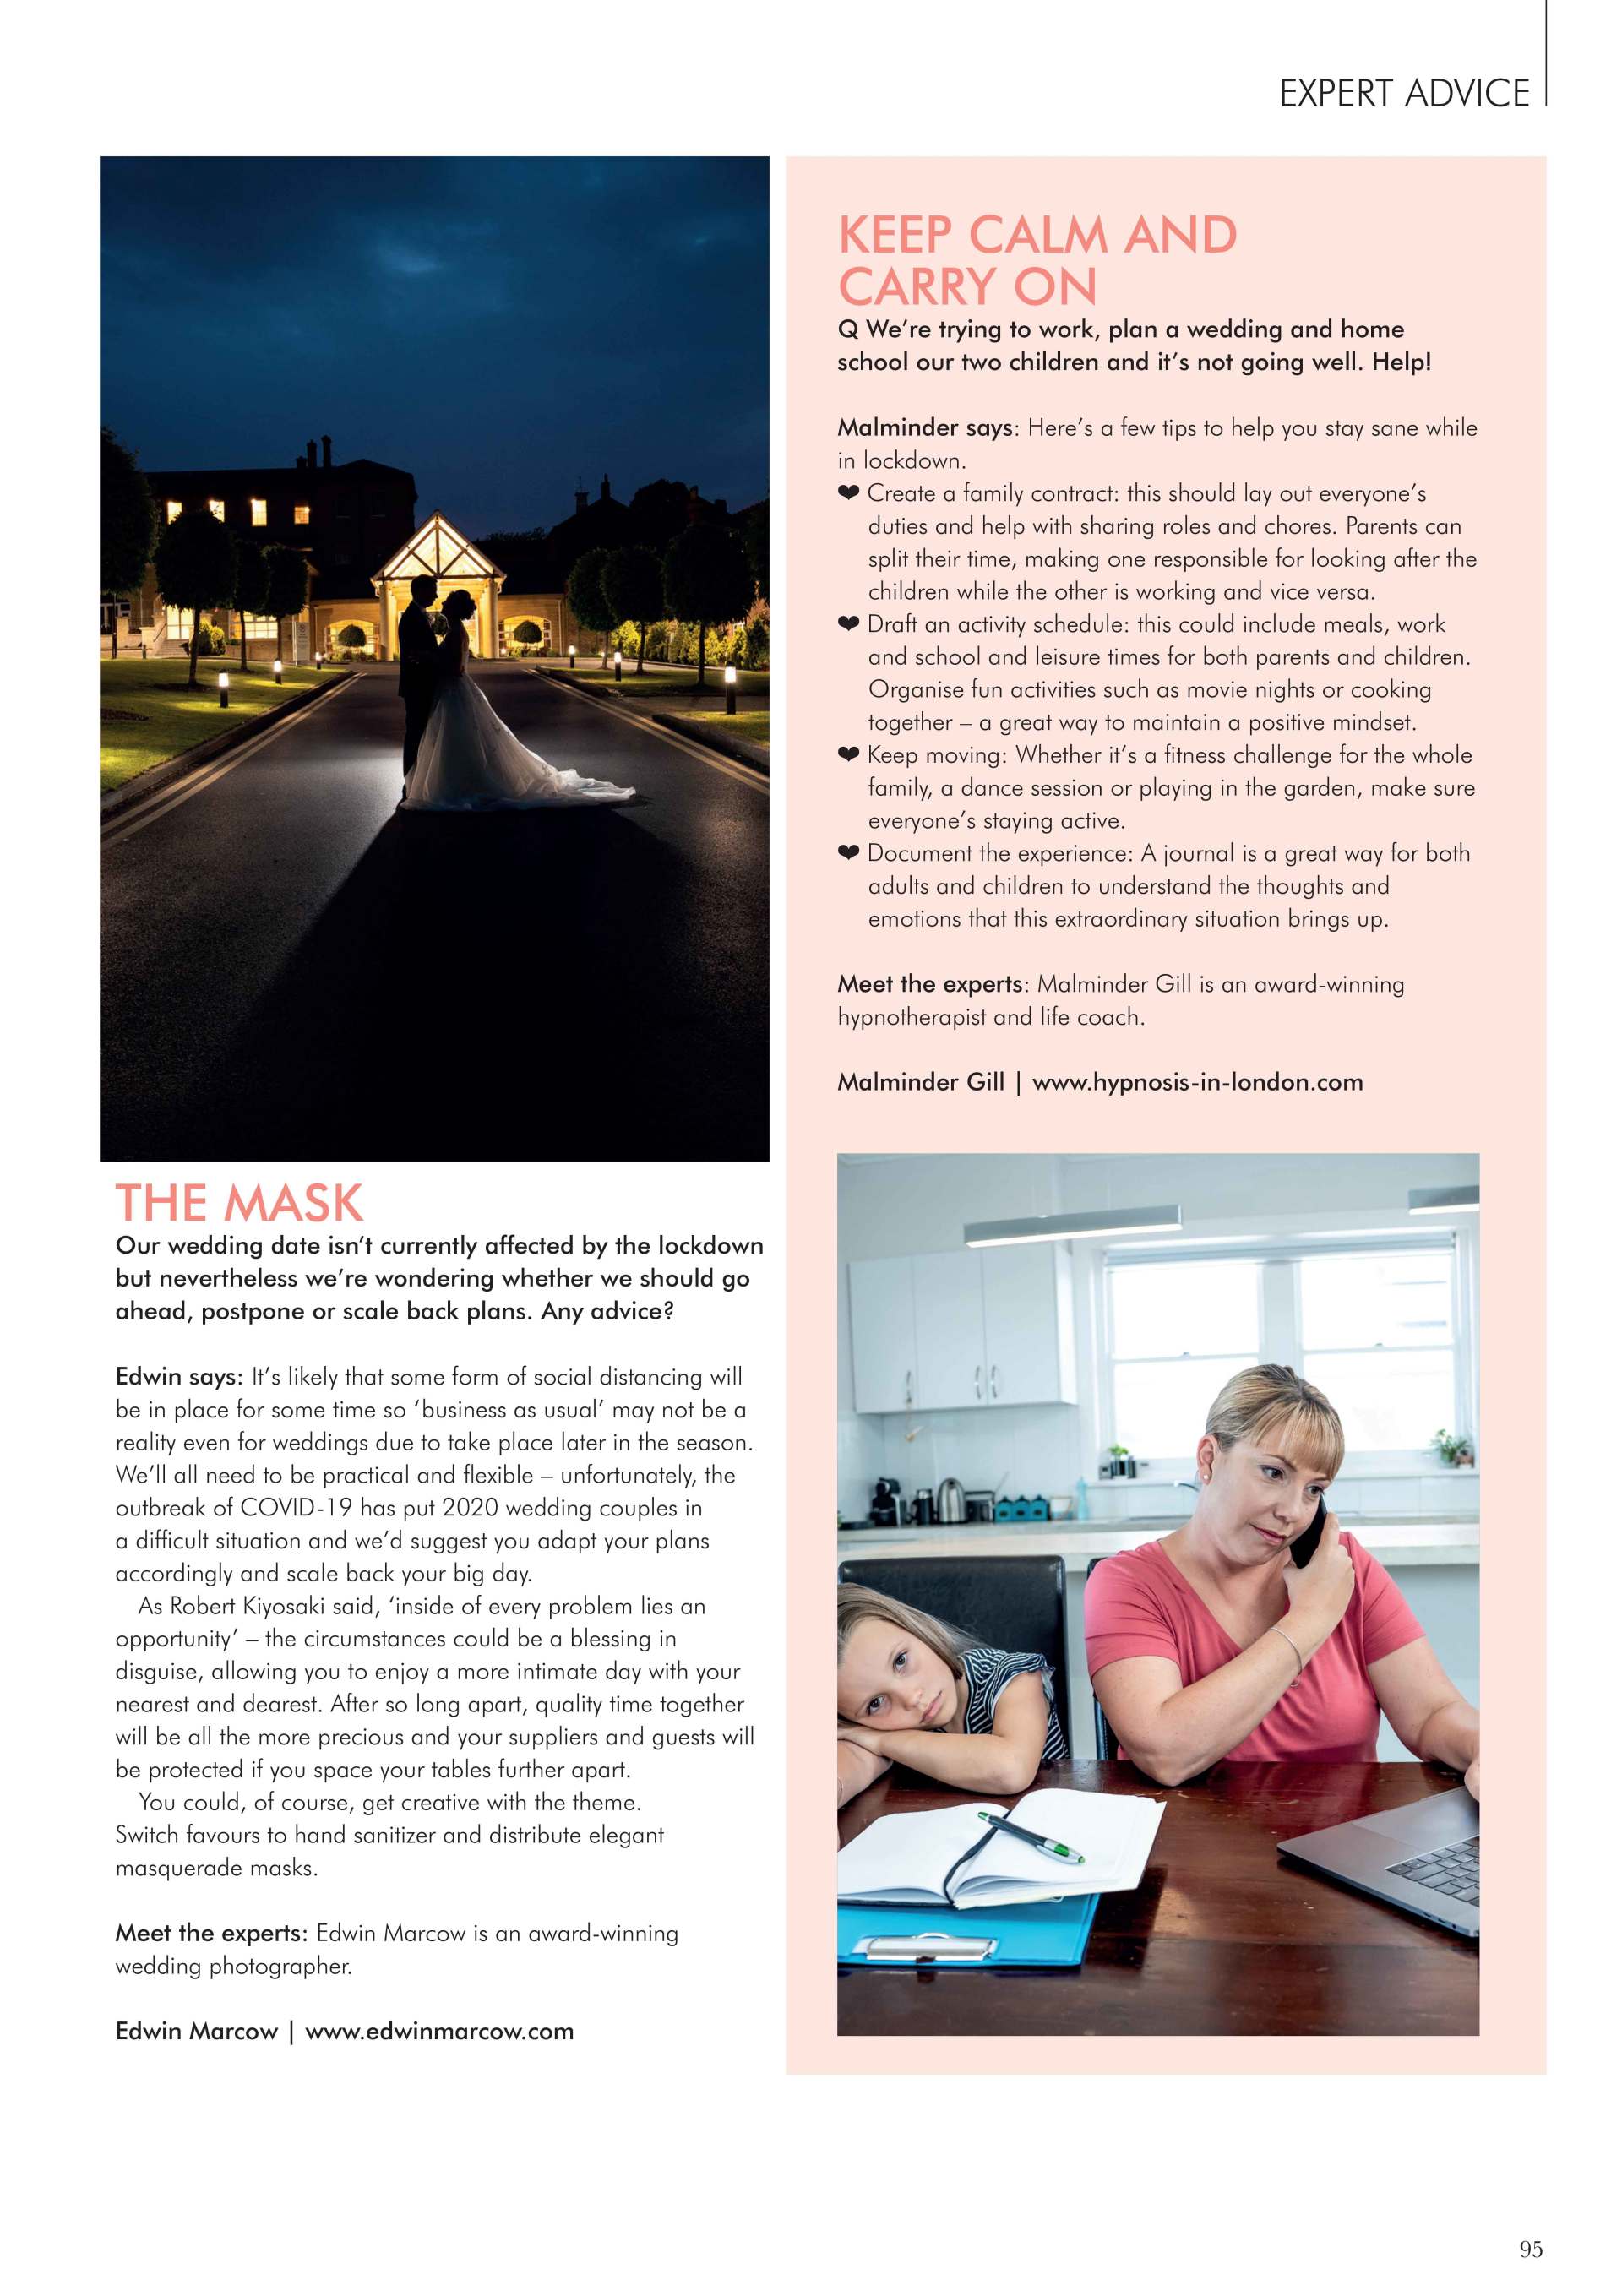 edwin marcow's article on how to plan your wedding after Covid 19 in London Wedding Magazine